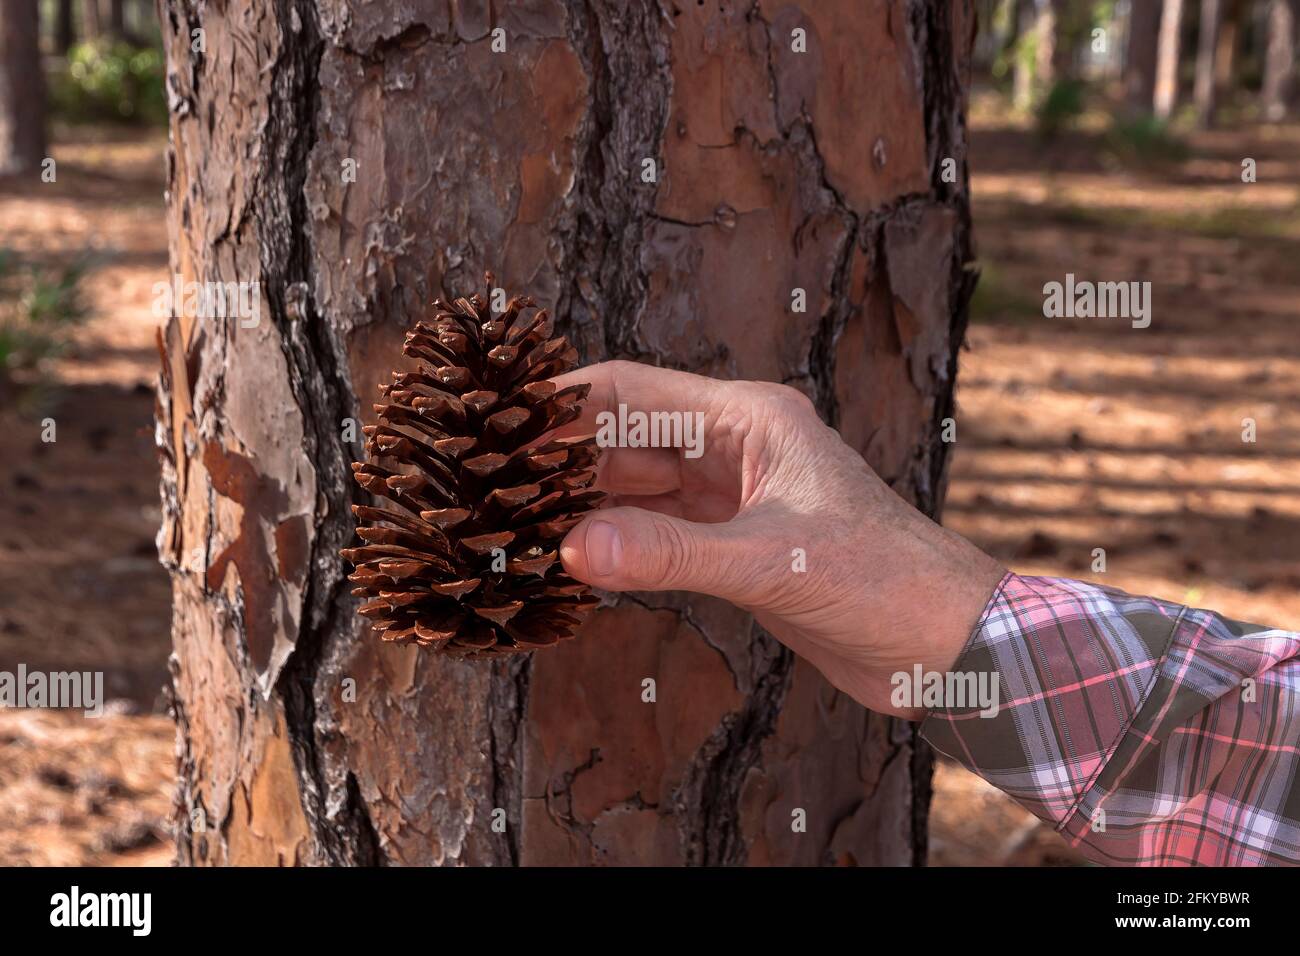 Hand Holding a South Florida /Southern Slash Pine Cone in front of the tree's bark. Stock Photo